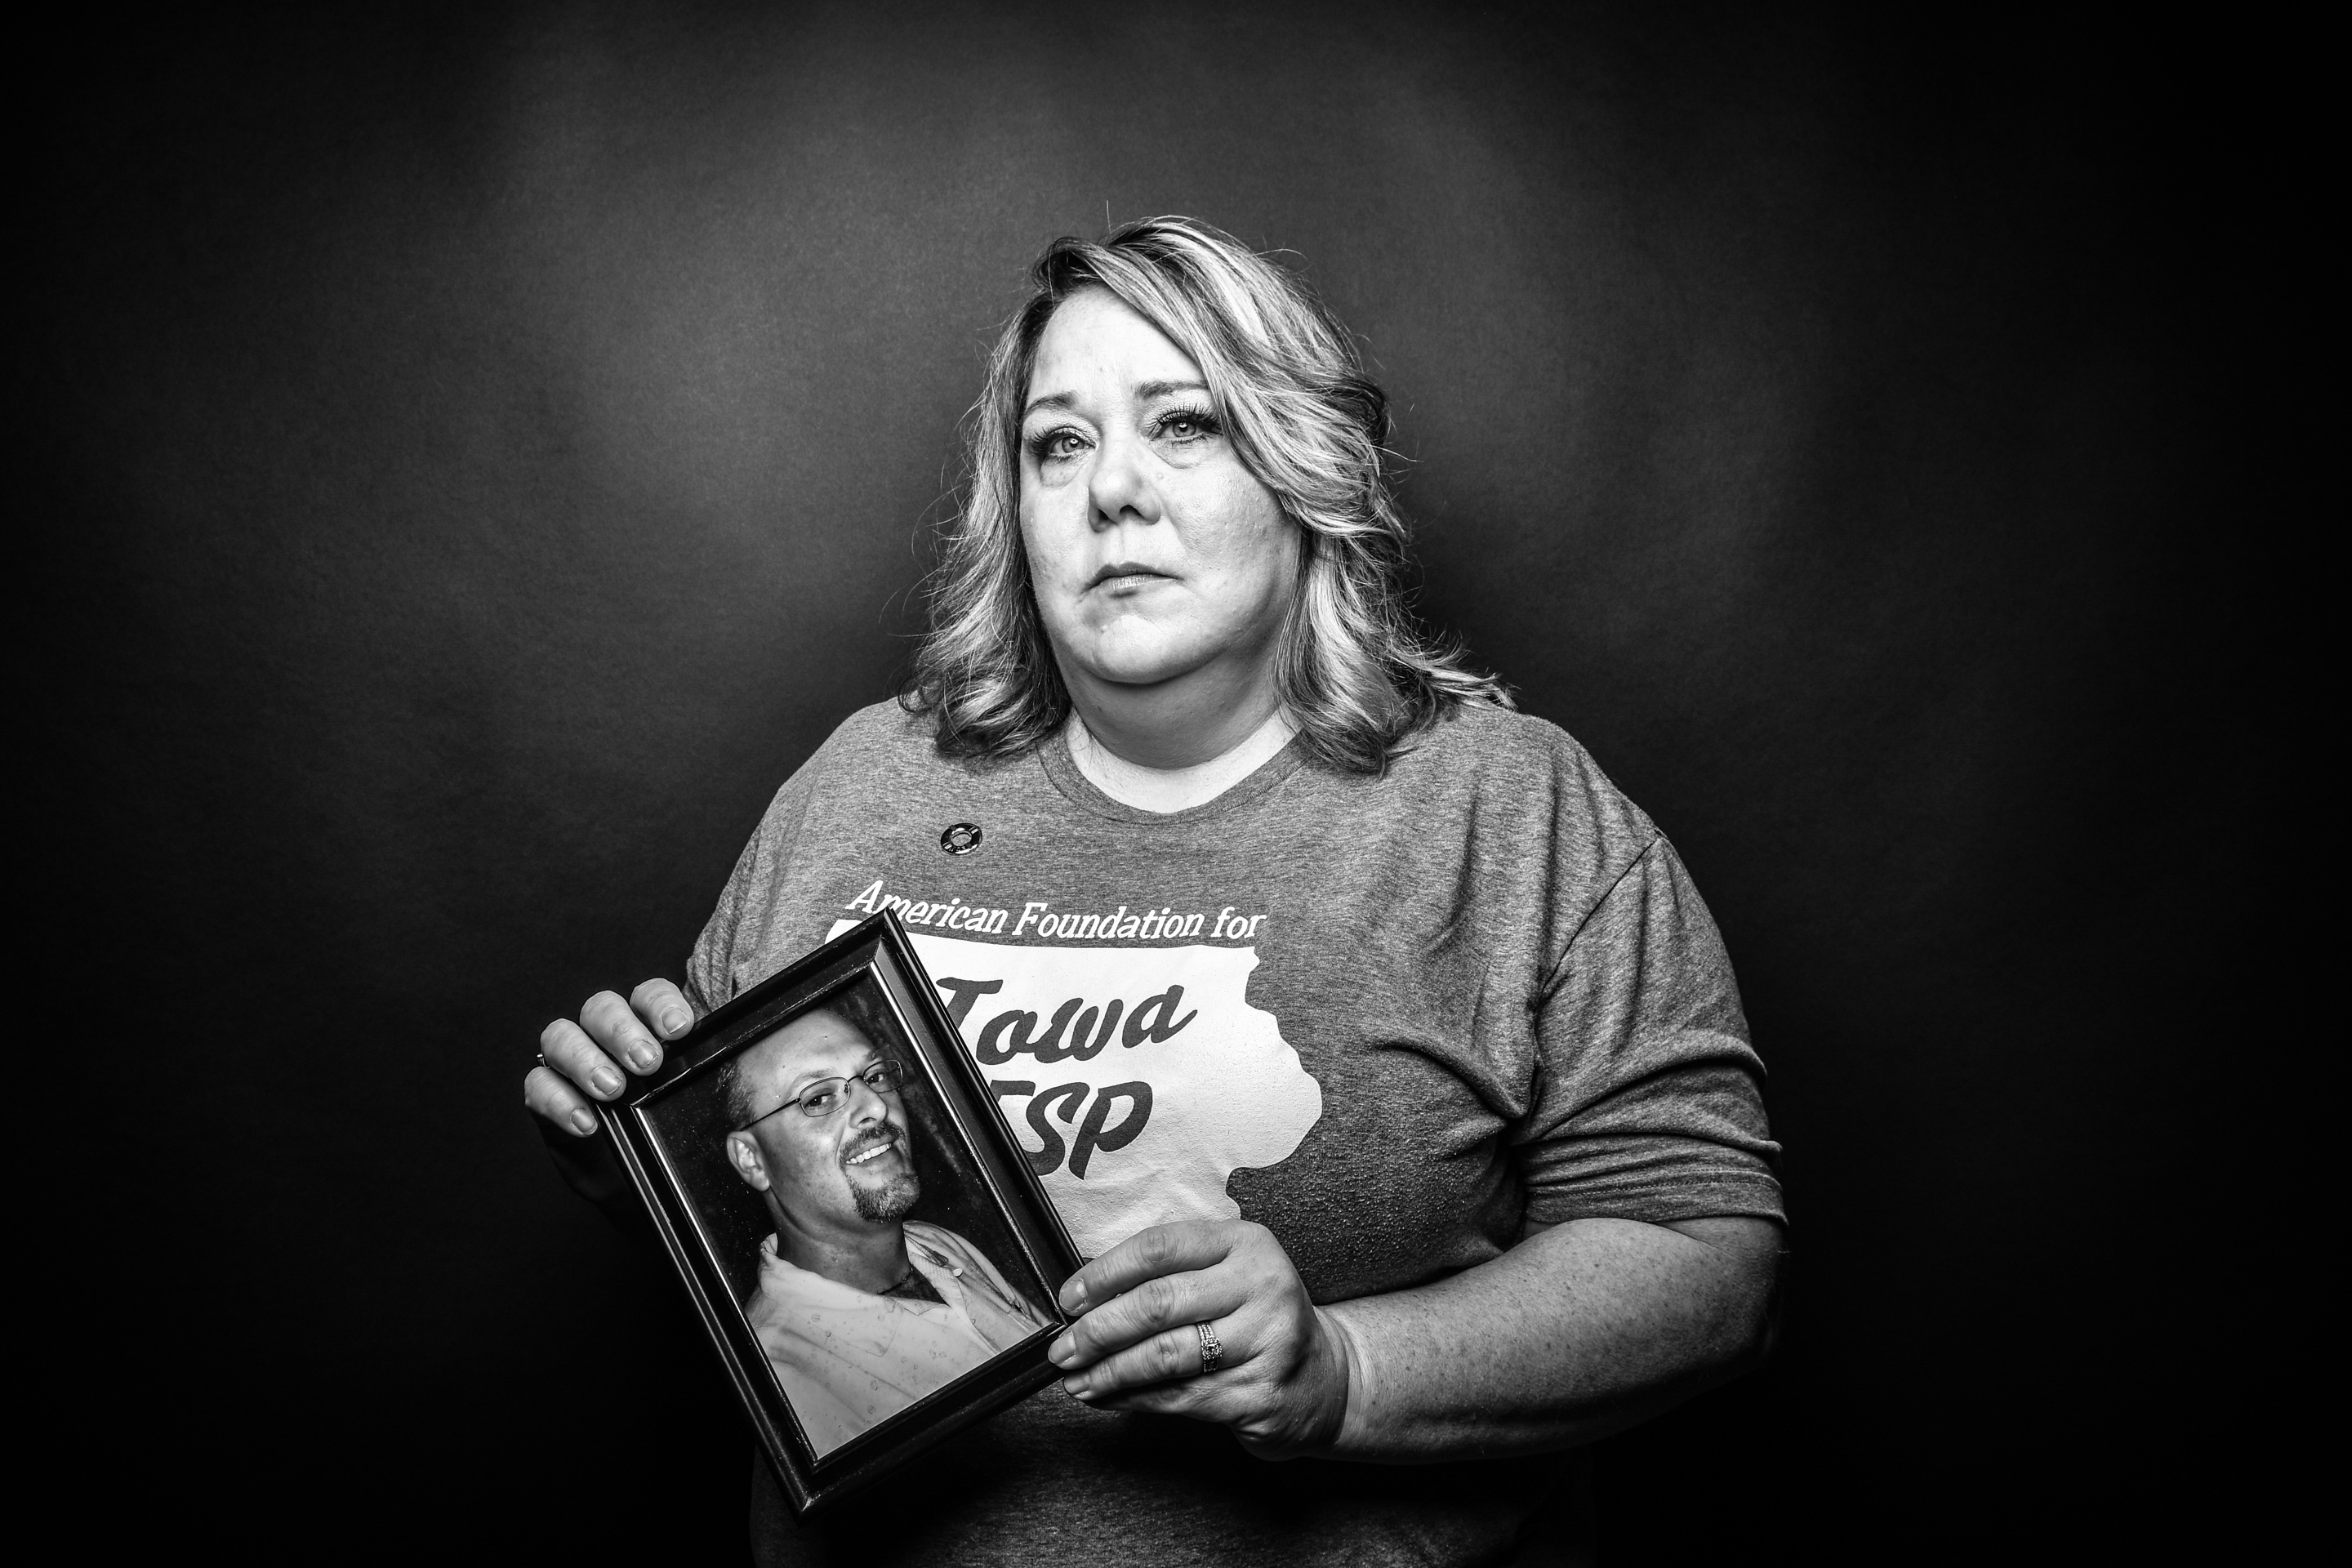 Christina Malchodi, Bettendorf, holds a photo of her former fiance, Rich, who died by suicide at 37, in 2010.